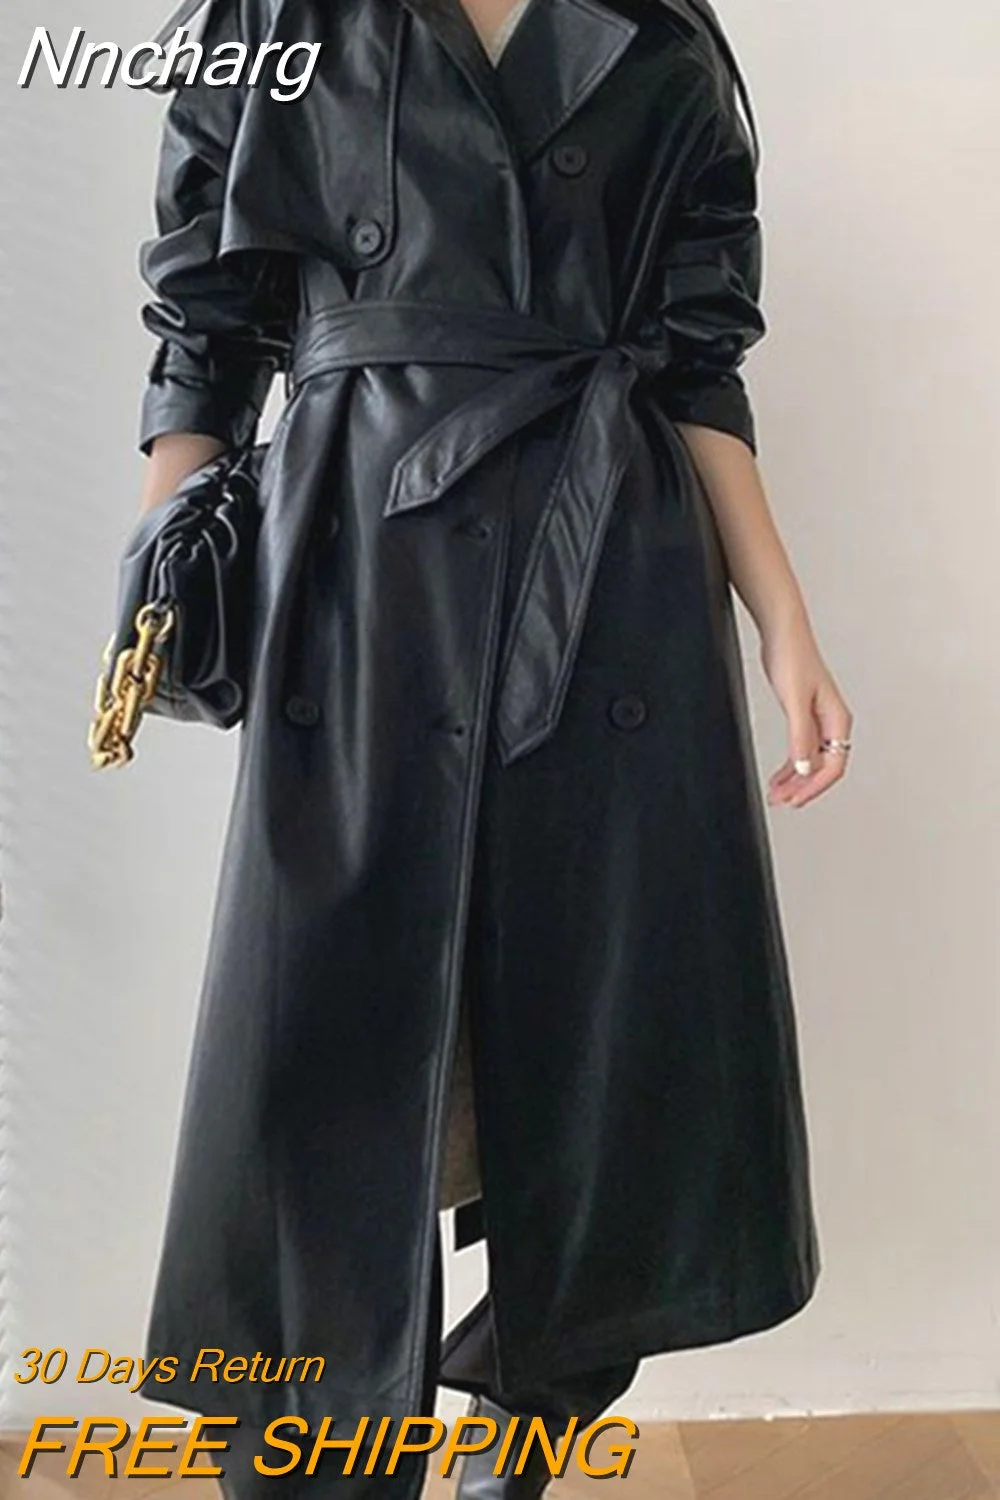 Nncharge Women Long Jacket Oversized Faux Leather Korean Fashion Coat Lapel Loose Office Lady Streetwear Double Breasted Tops